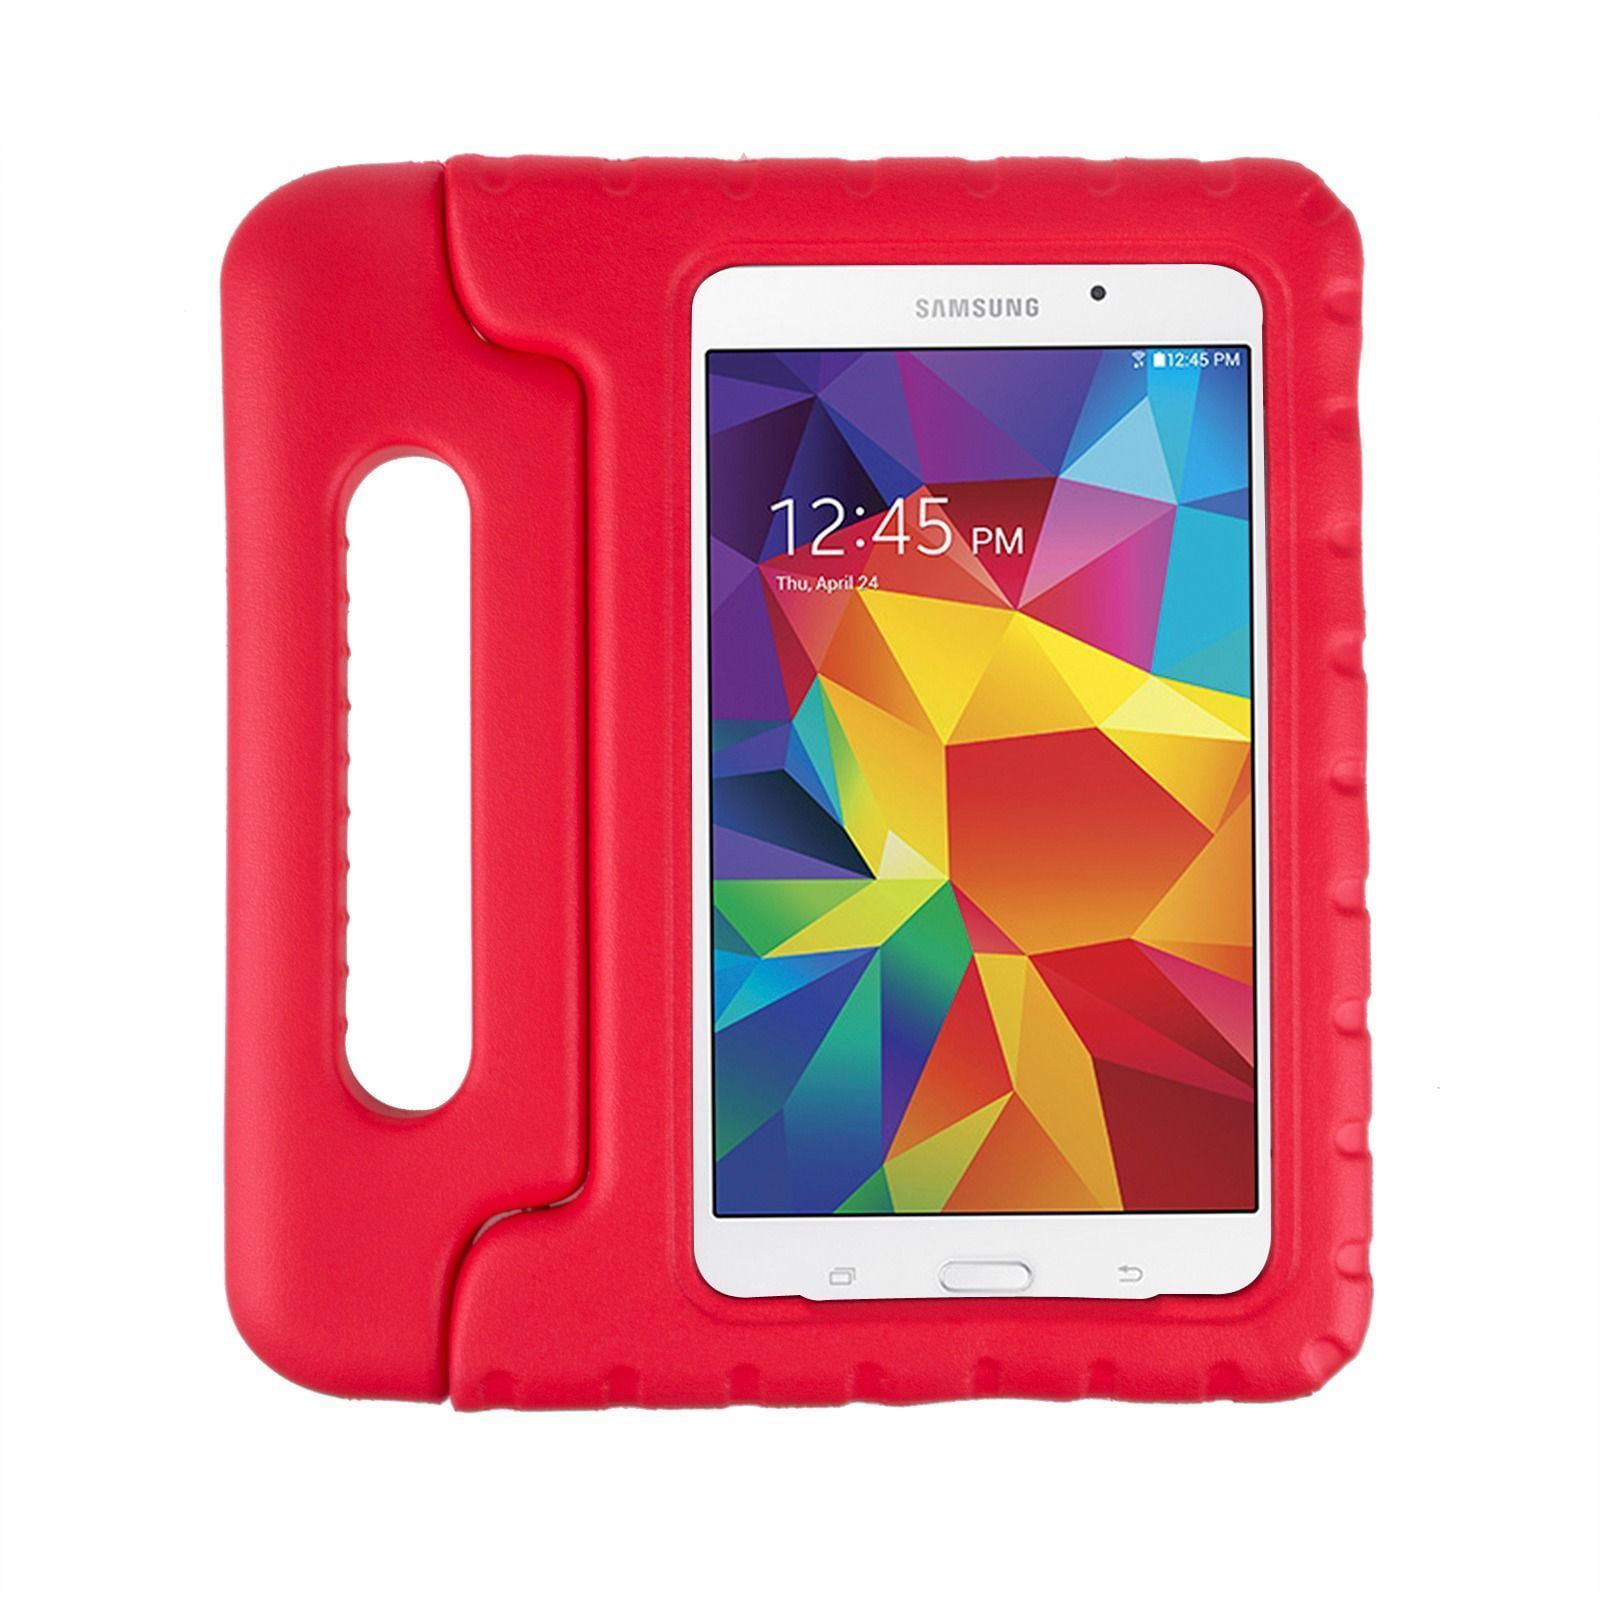 Afgrond pols favoriete KIQ Galaxy Tab 4 7.0 Case, EVA Foam Kid-Proof Child Proof Heavy Duty Kids Tablet  Cover with Handle for Samsung Galaxy Tab 4 7.0 T230 SM-T230 [Red] -  Walmart.com